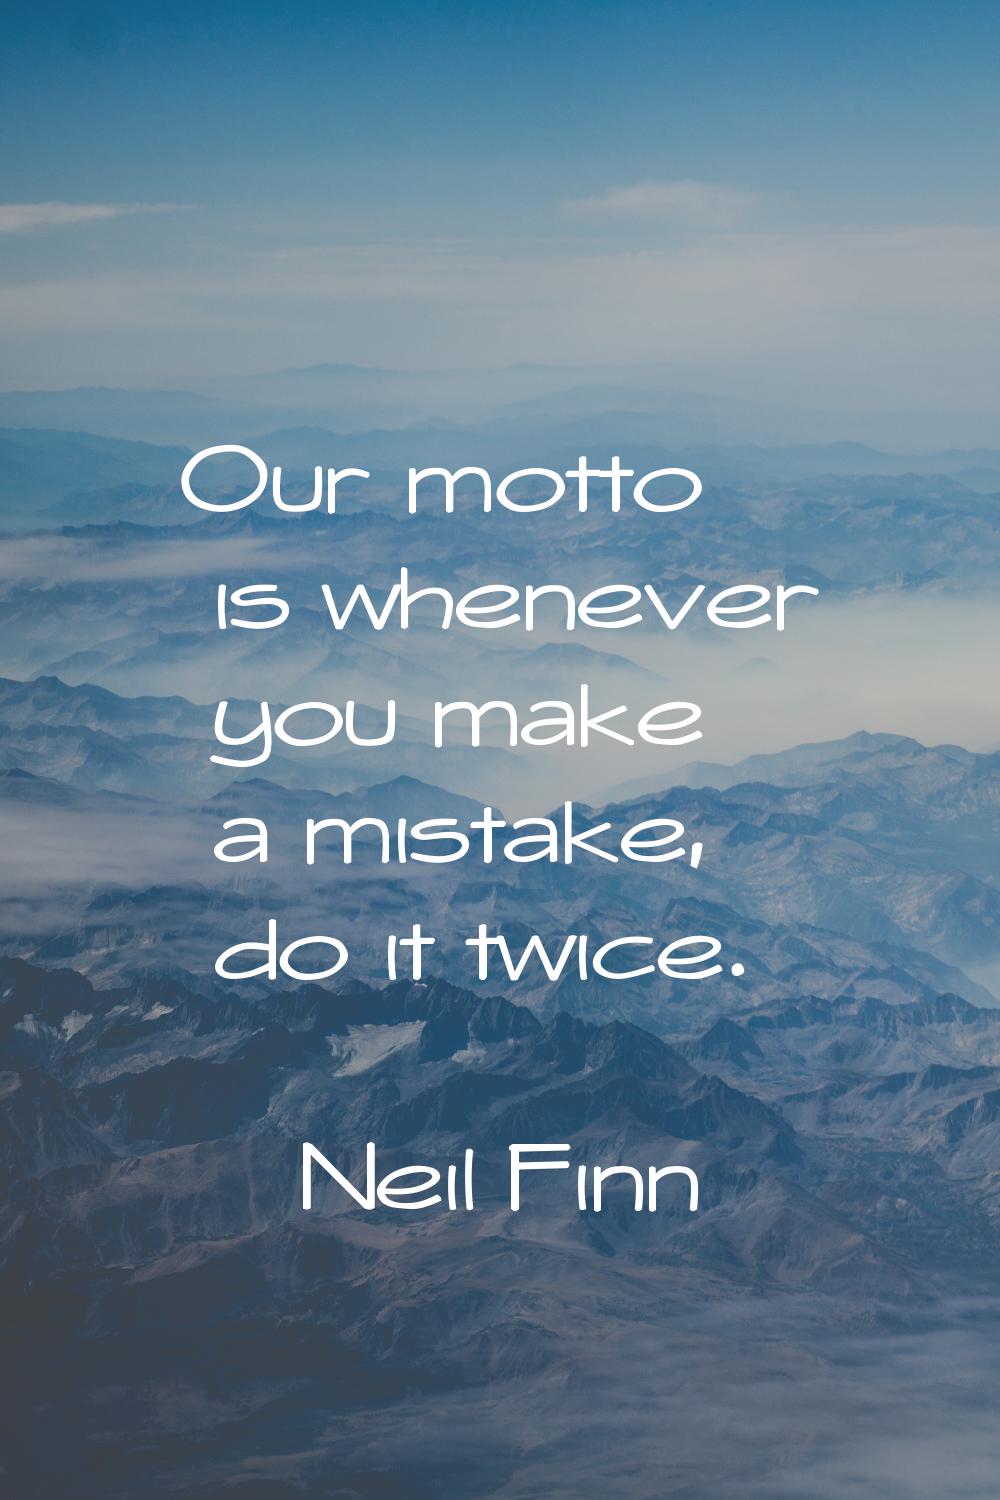 Our motto is whenever you make a mistake, do it twice.